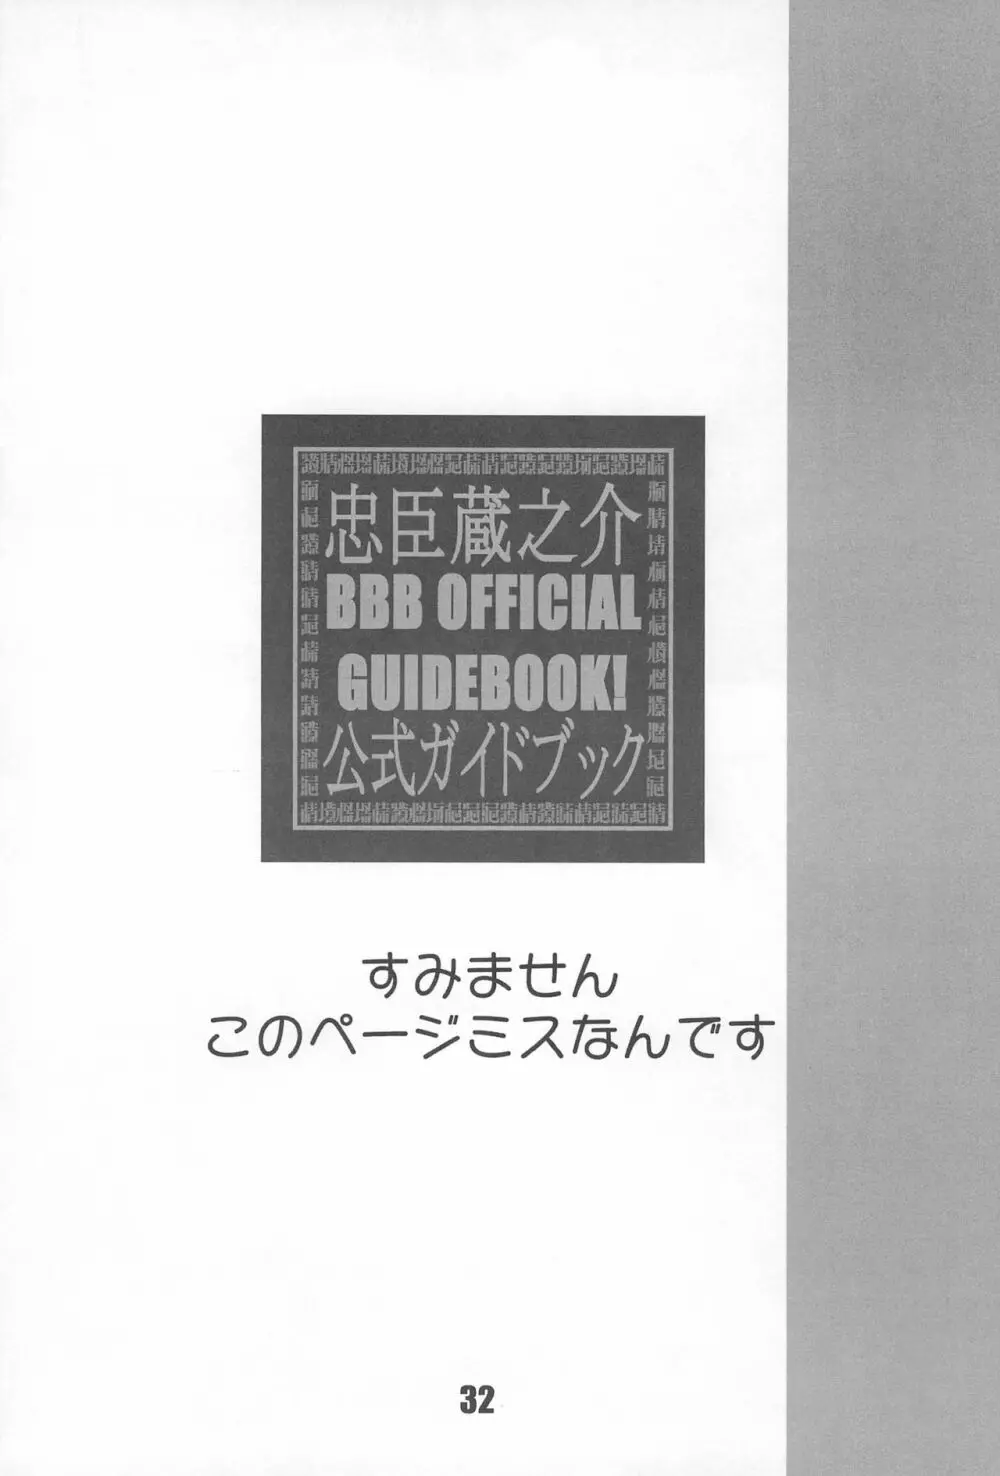 BBB OFFICIAL GUIDE BOOK 32ページ